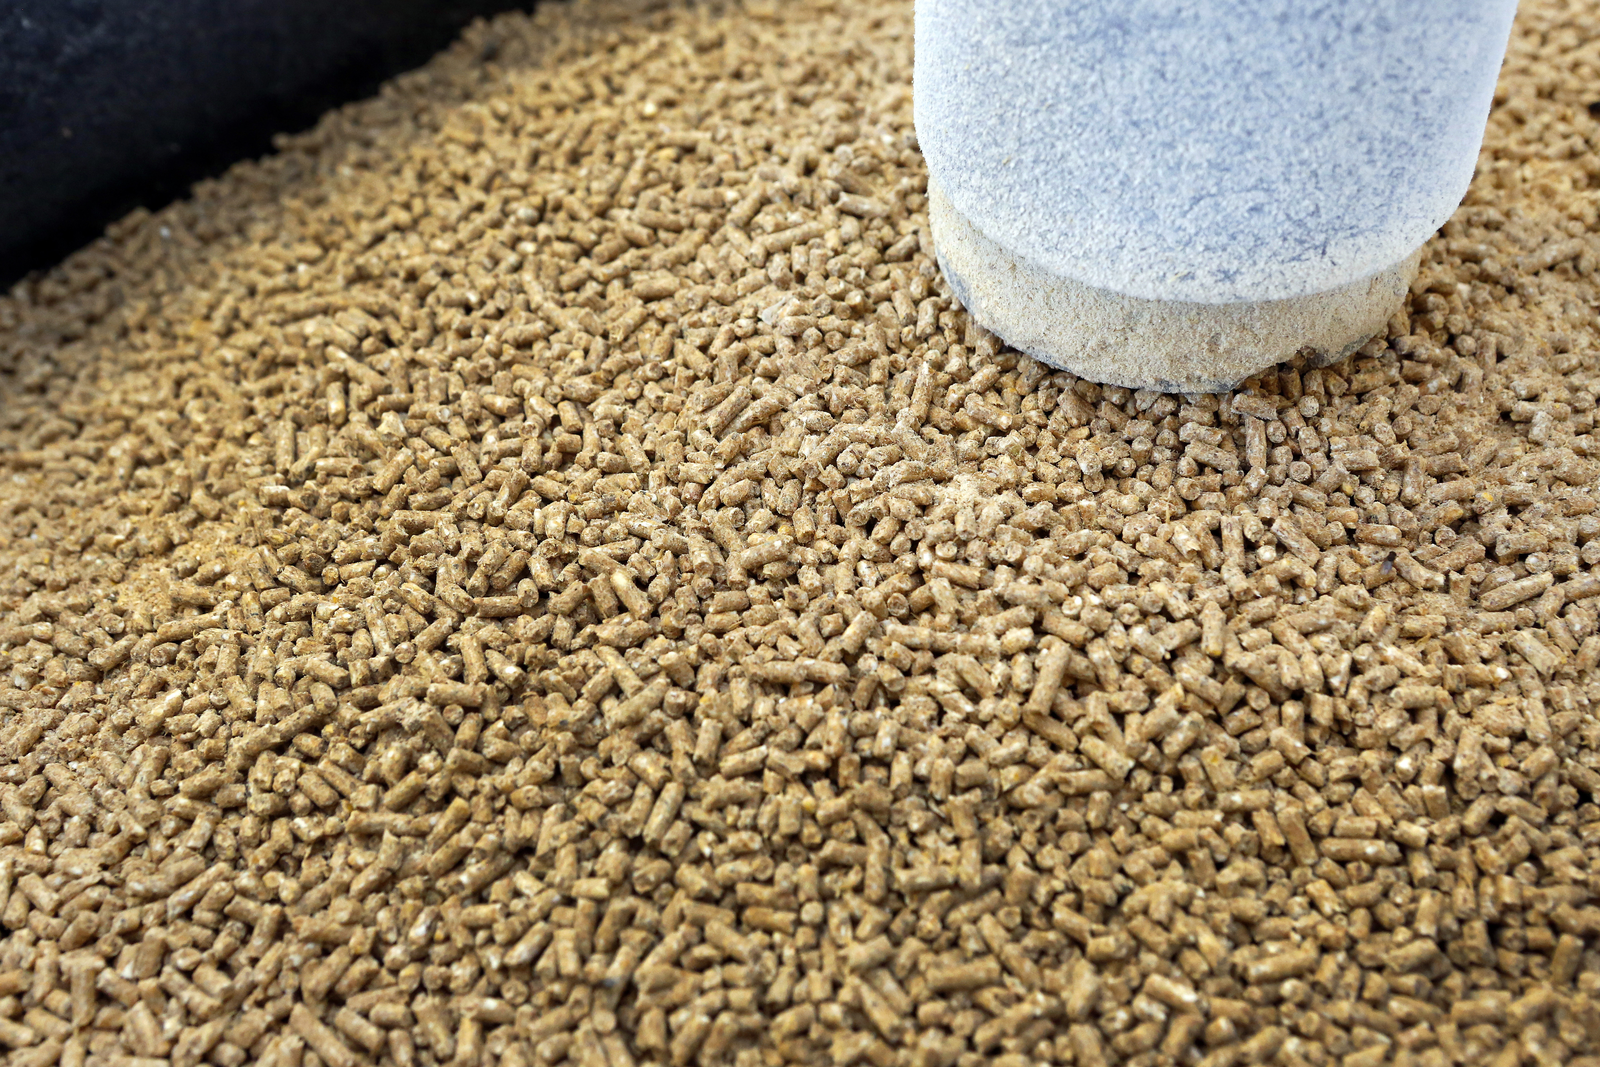 ASF leads Russia to refuse Belarusian feed additives